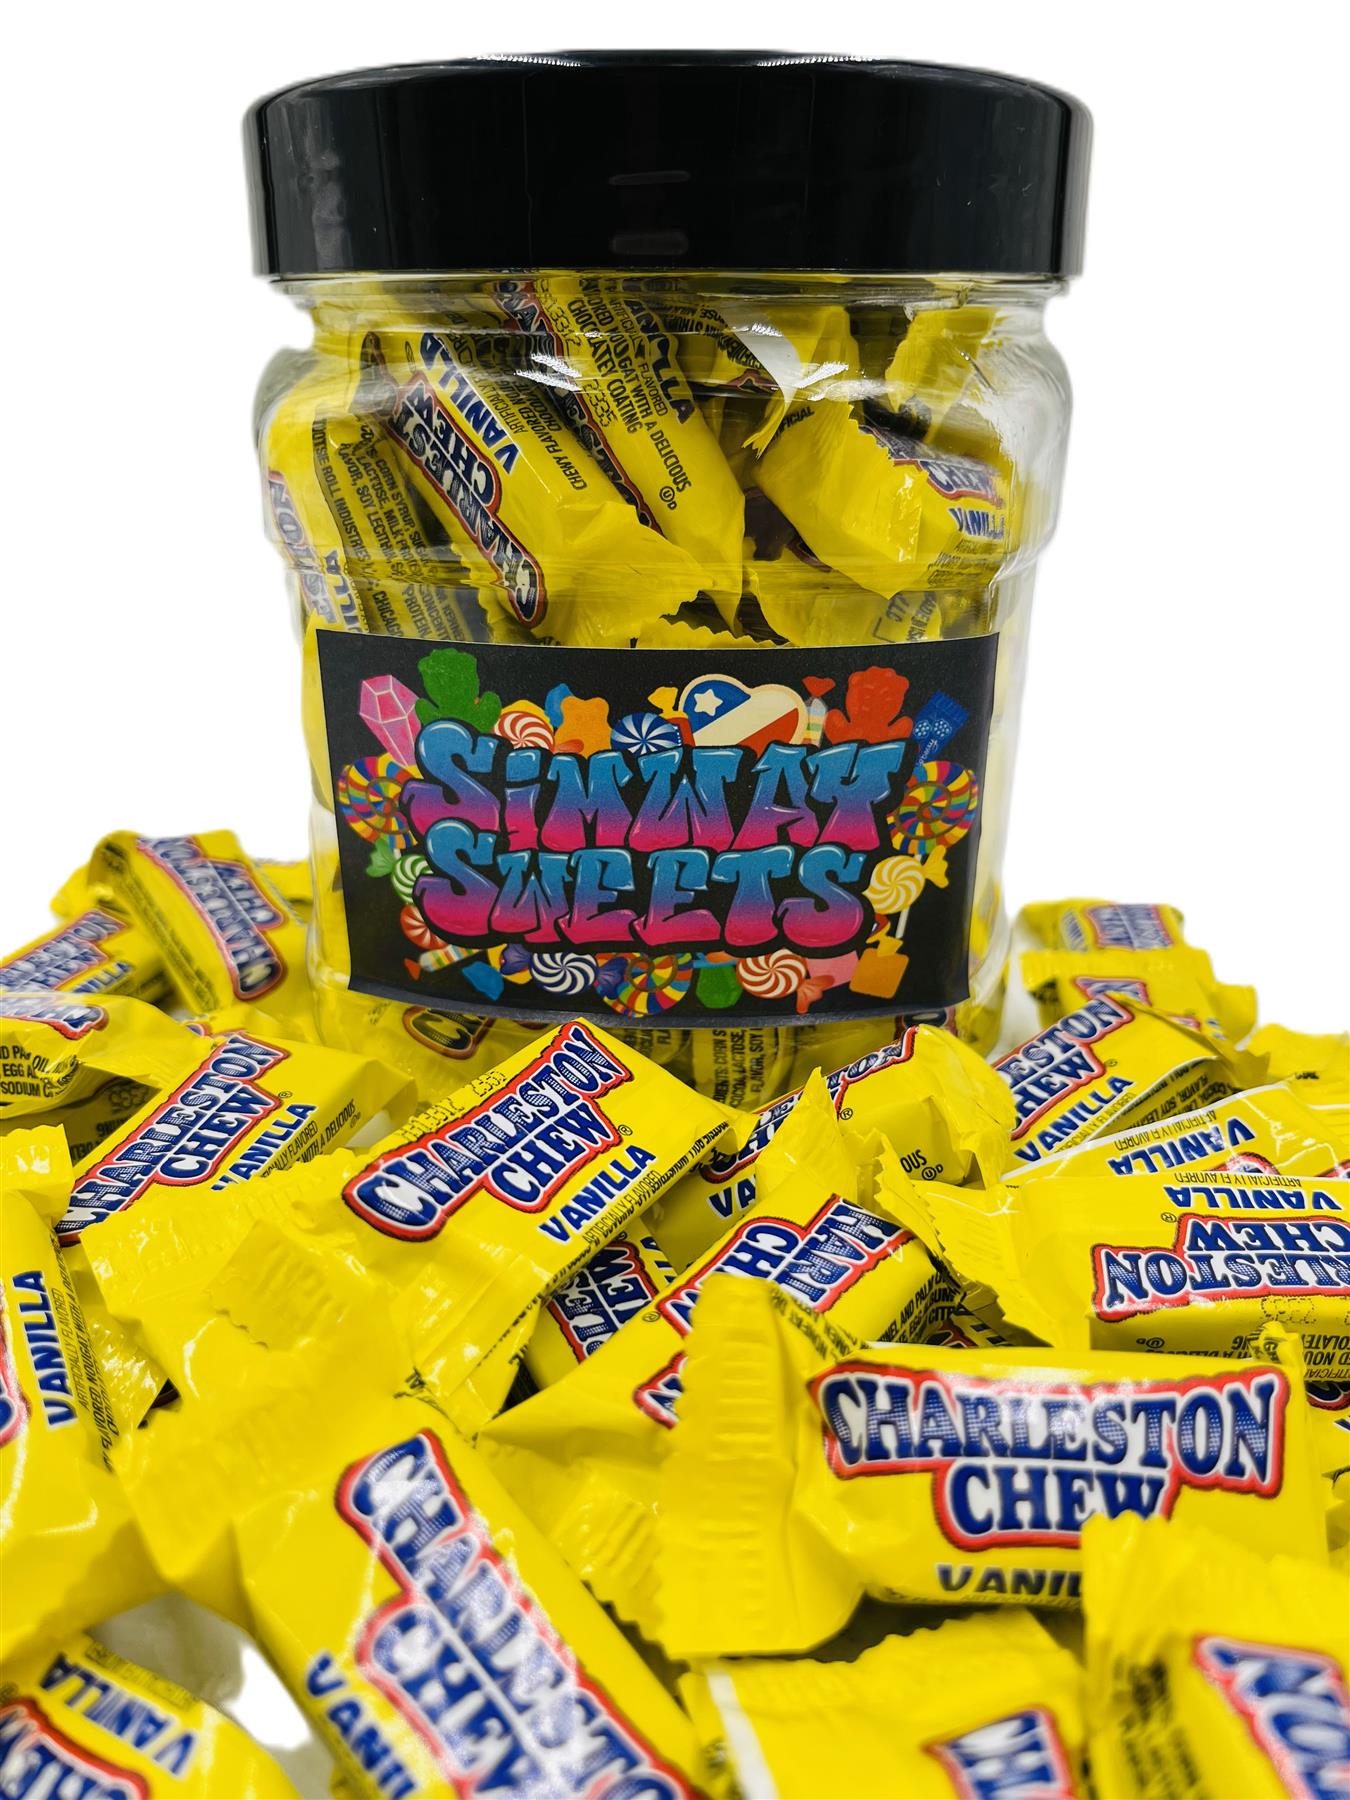 Simway Sweets Jar 560g - Charleston Chews Vanilla Minis - Individually Wrapped American Sweets - Approximately 60 Pieces